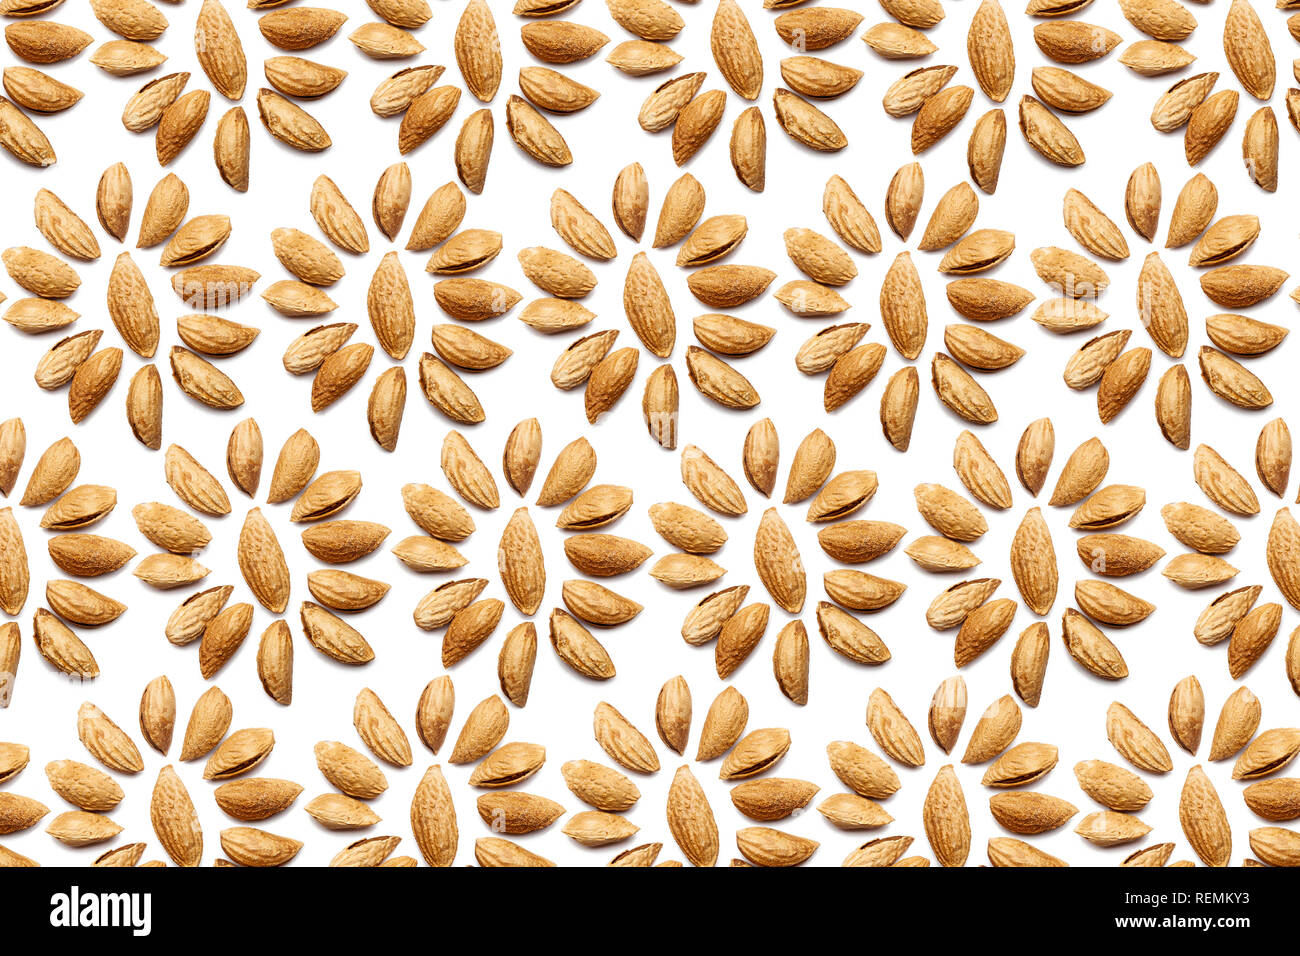 Pattern of Nuts - peeled almonds Badam on a white background in the form of a circle. Concepts about decoration, healthy eating and food background. Stock Photo